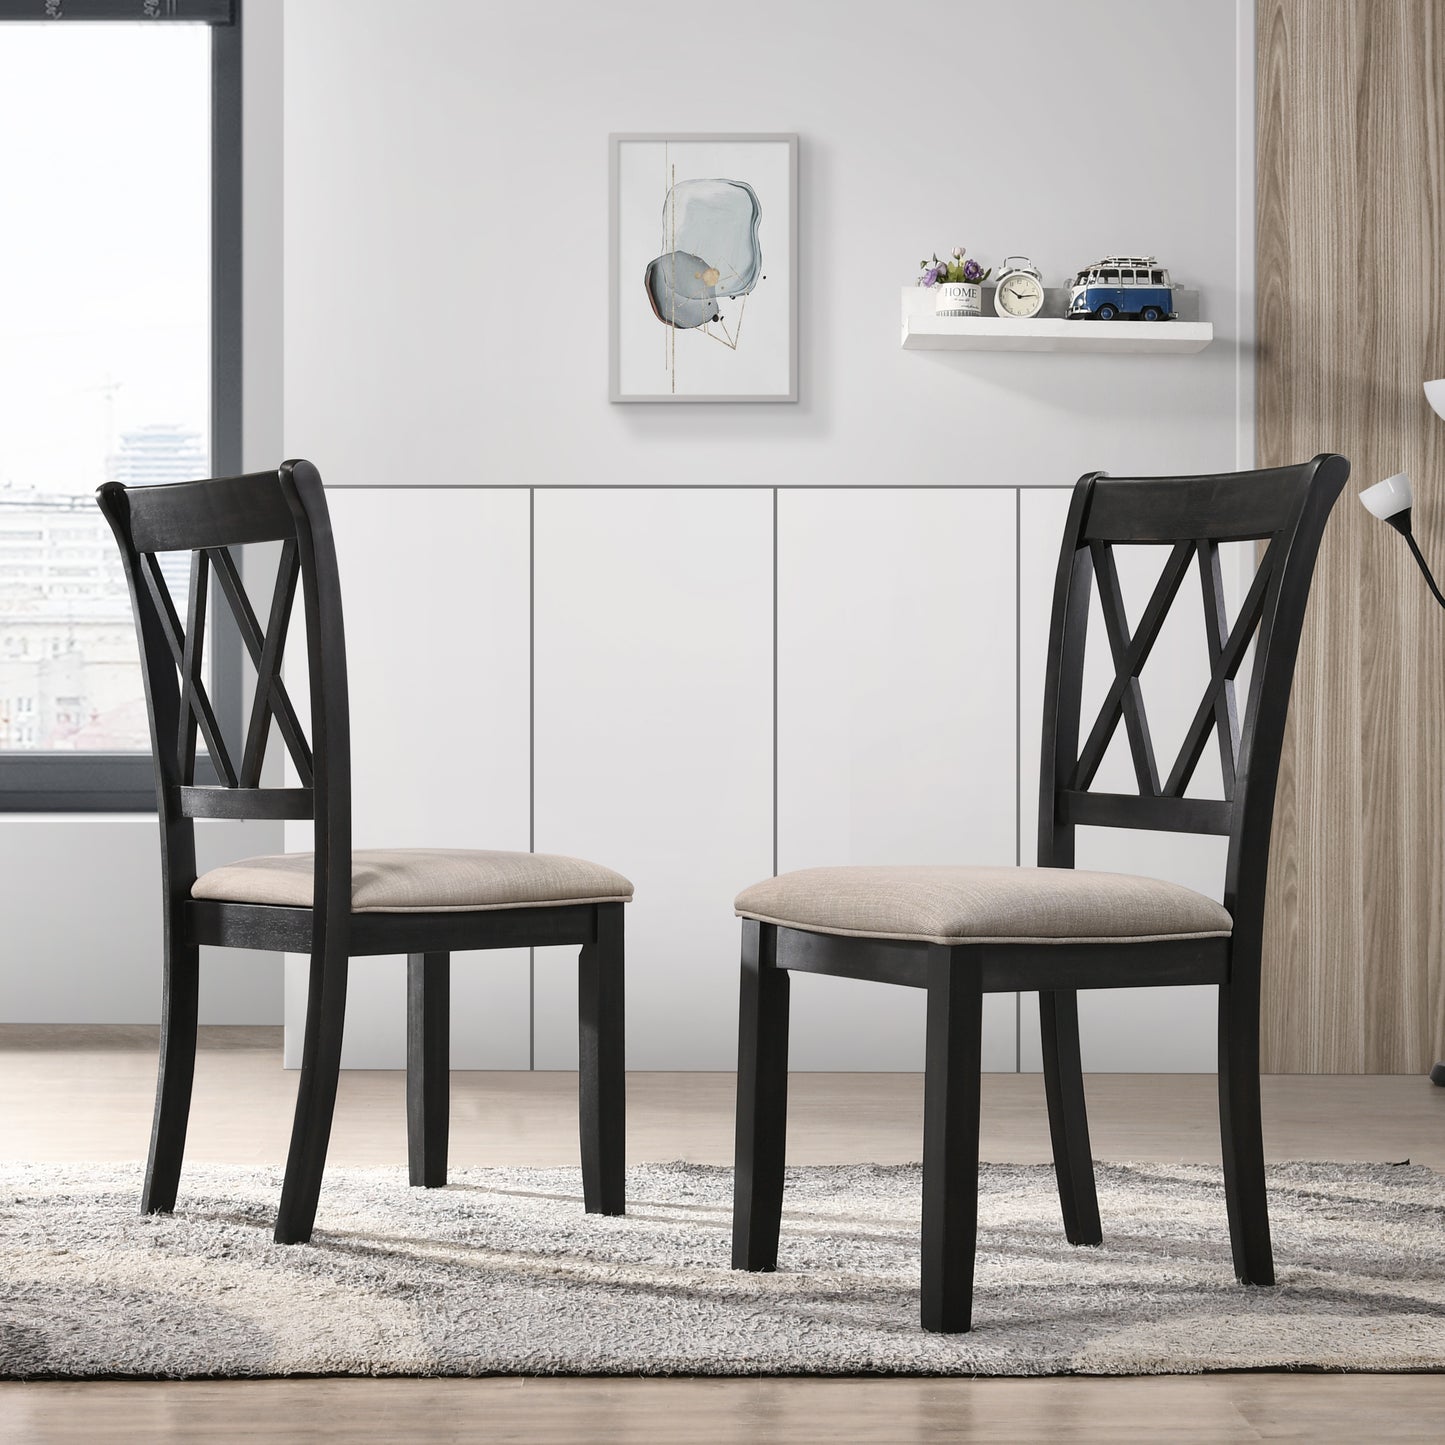 Hensfield Contemporary 7-Piece Dining Set, Dining Table with 6 Cross-back Chairs, Rich Black